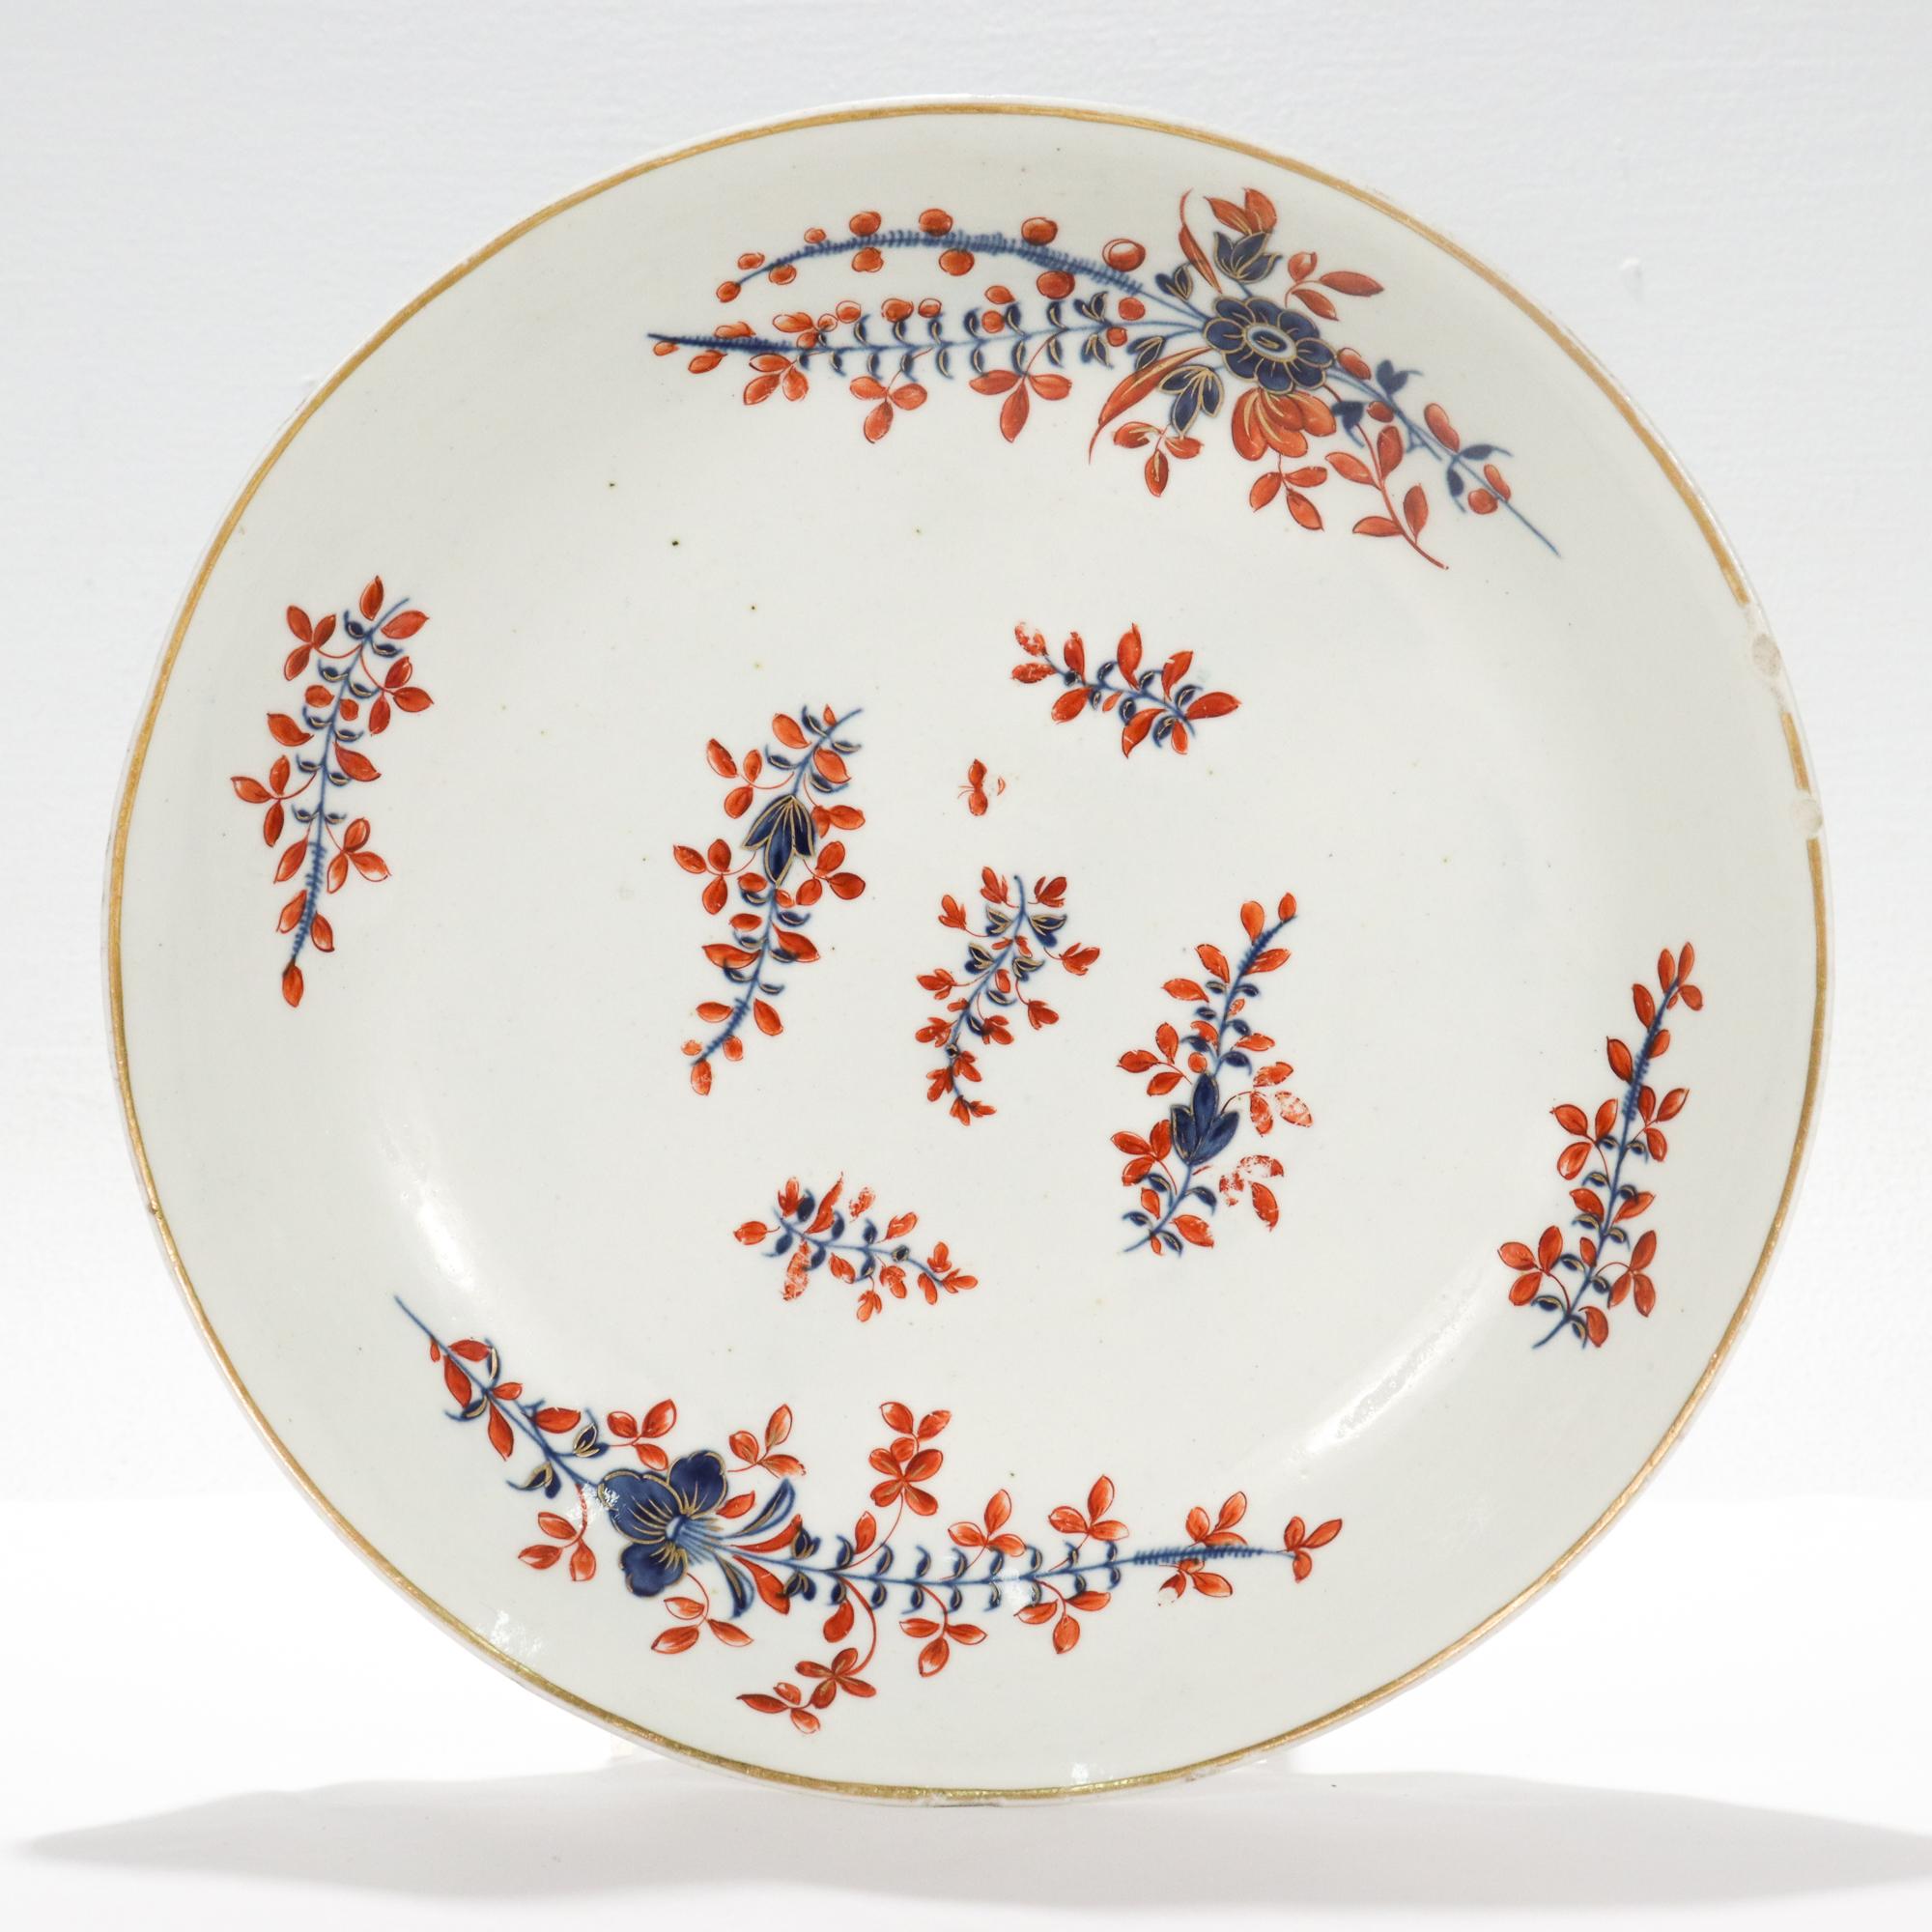 A fine antique Chantilly French porcelain low bowl.

Decorated in an underglaze blue sprig pattern with additional cold painted iron-red leaves and gold highlights and a gilt rim.

The reverse bears old shop labels mistakenly identifying the